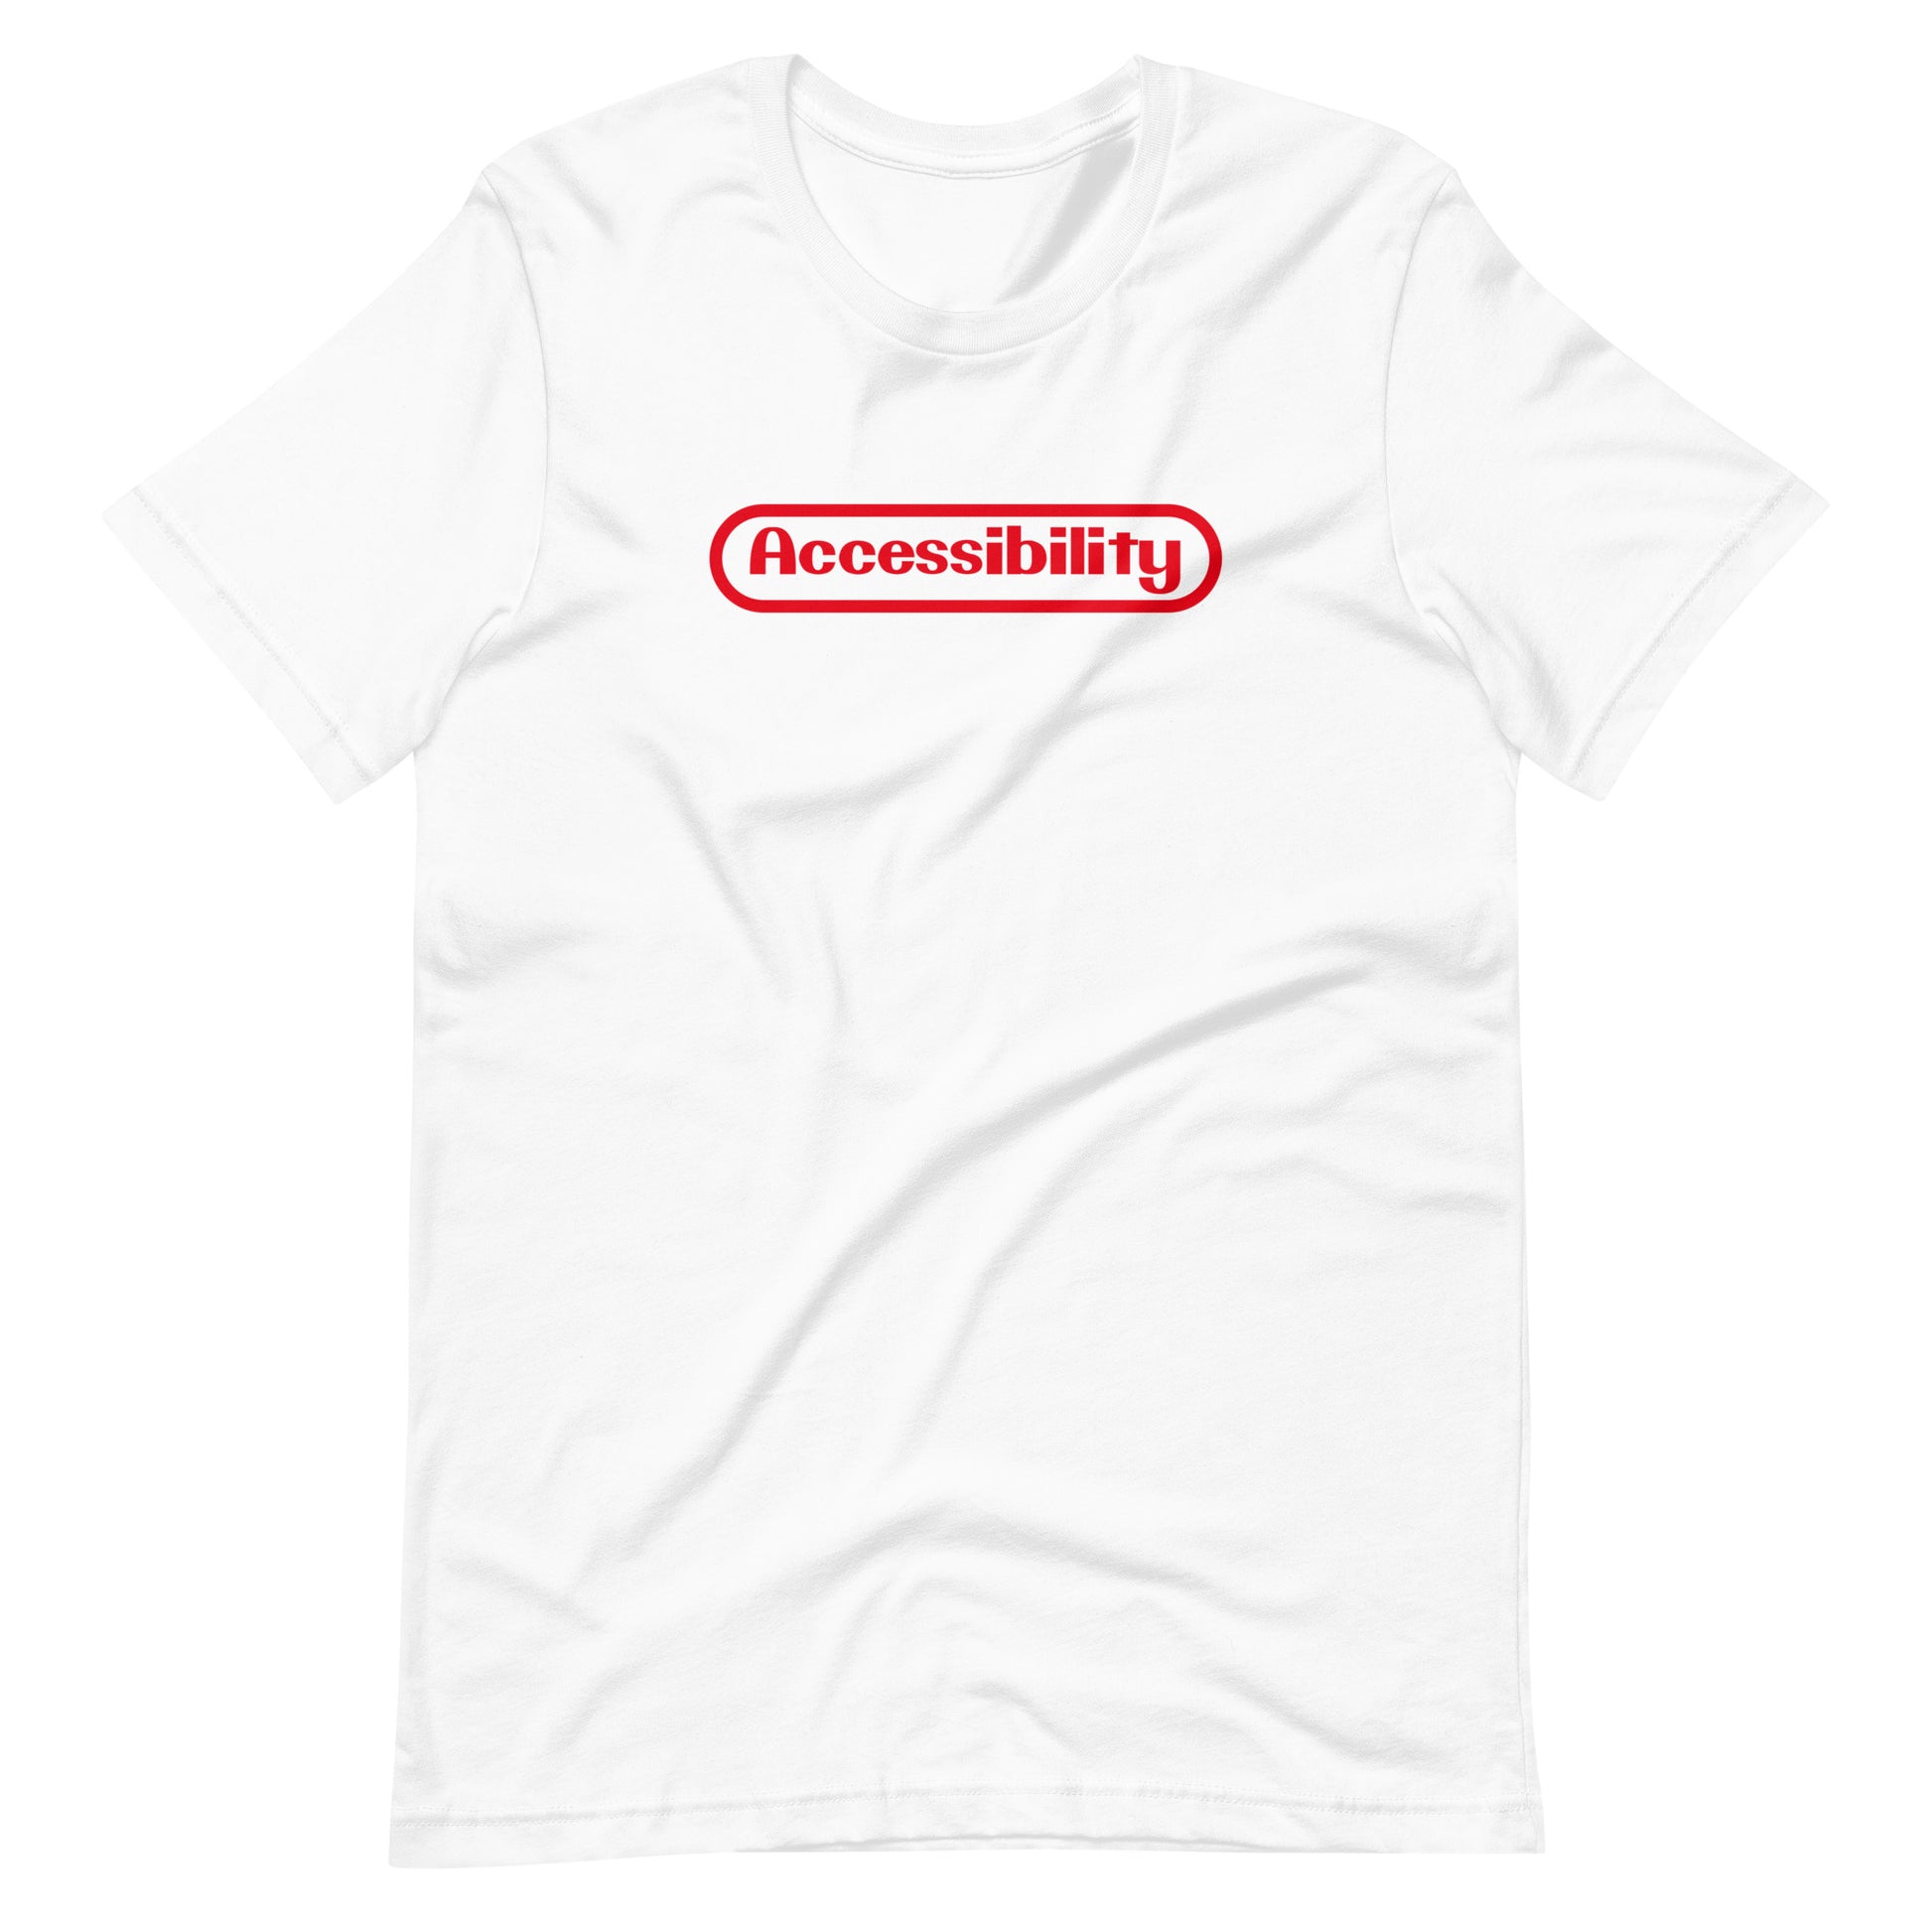 Red stylized Accessibility word with rounded border, prepresentative of the Nintent logo, center aligned, on front of white t-shirt.